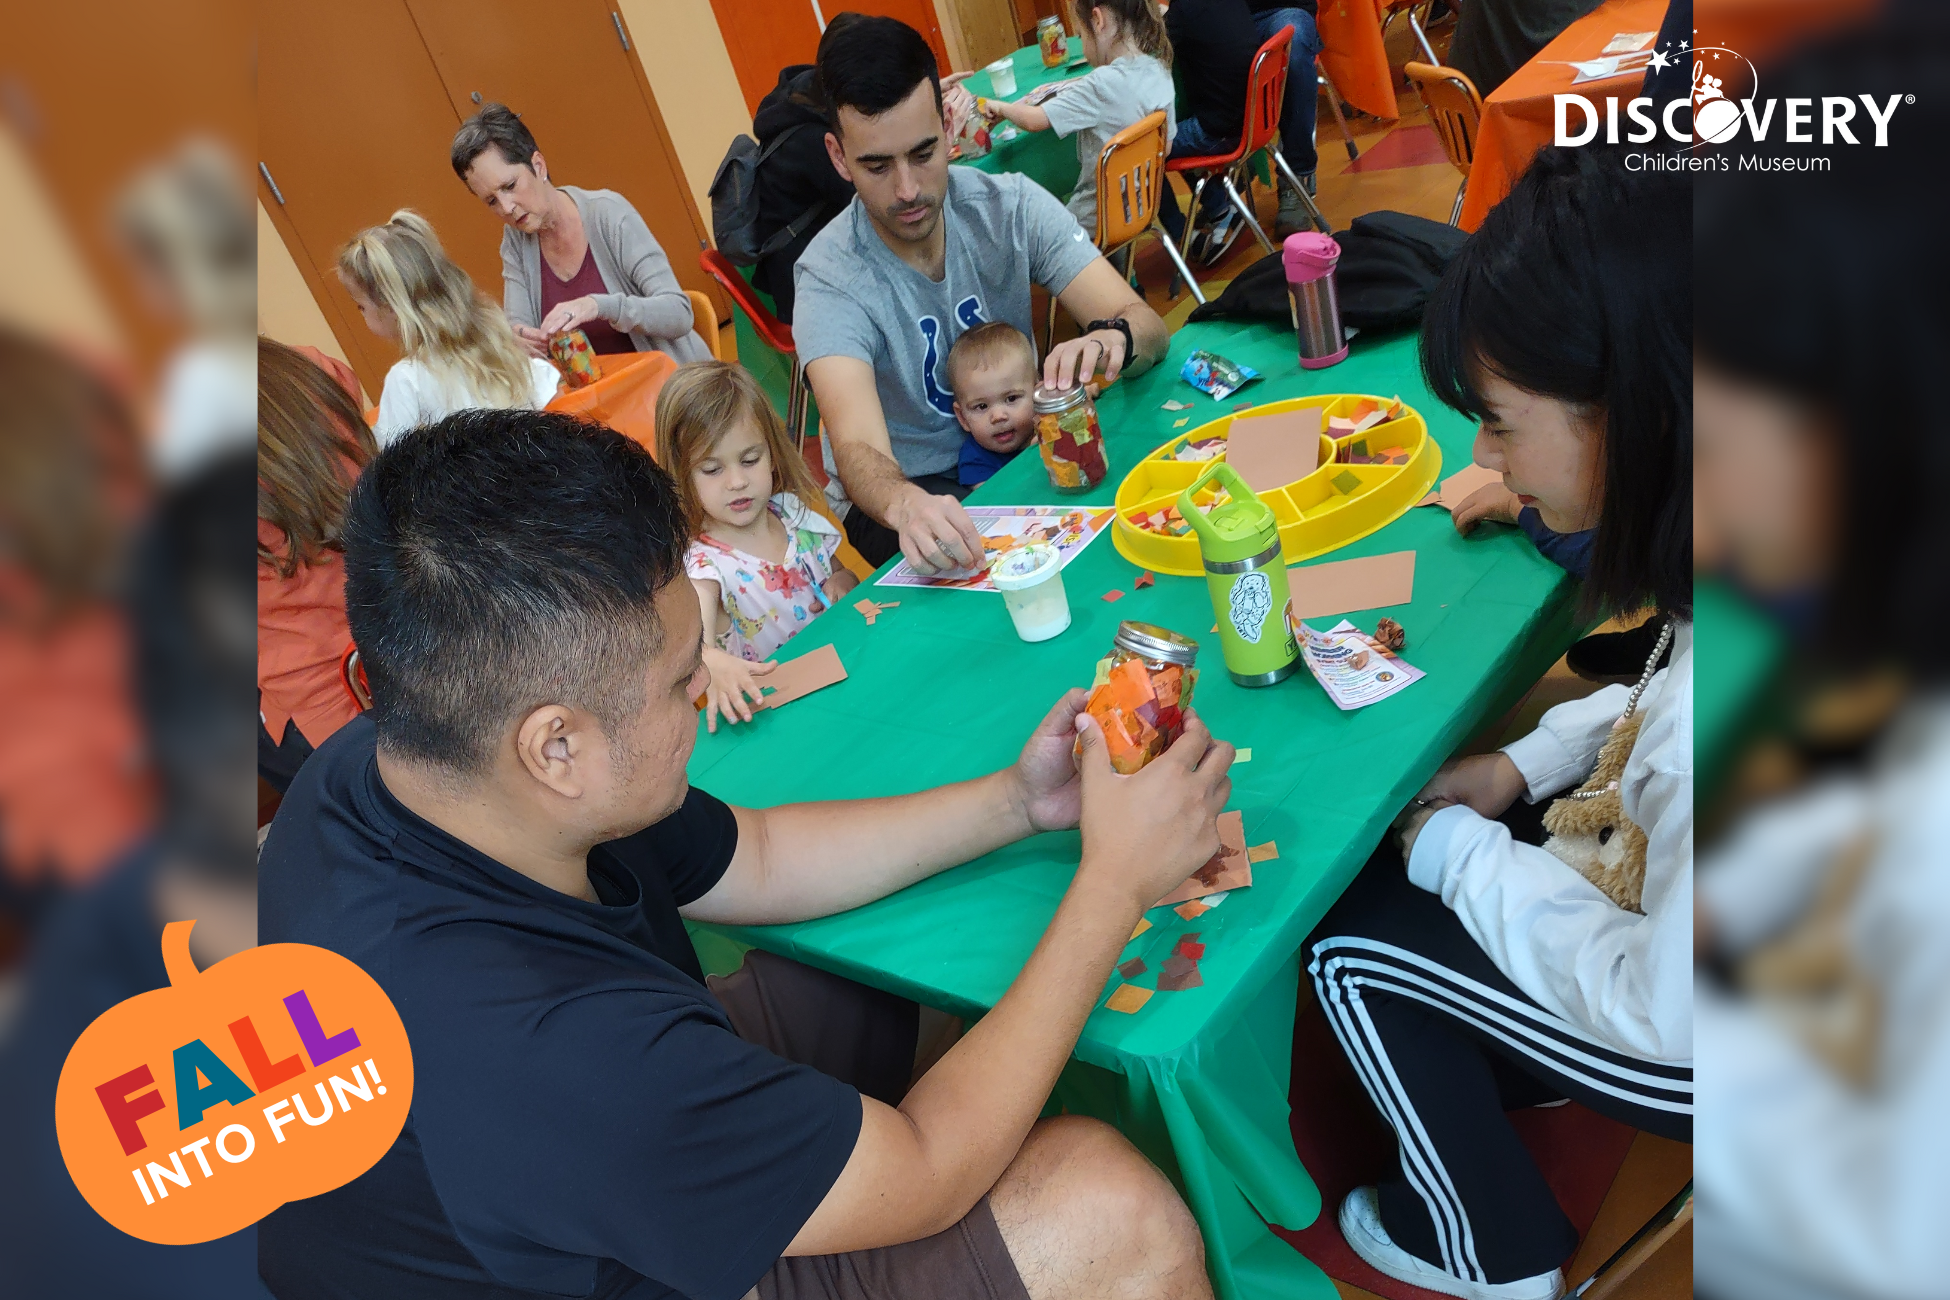 a man and woman looking at a jar full of colorful paper scraps at a crafts table with parents and children at the Discovery Children's Museum